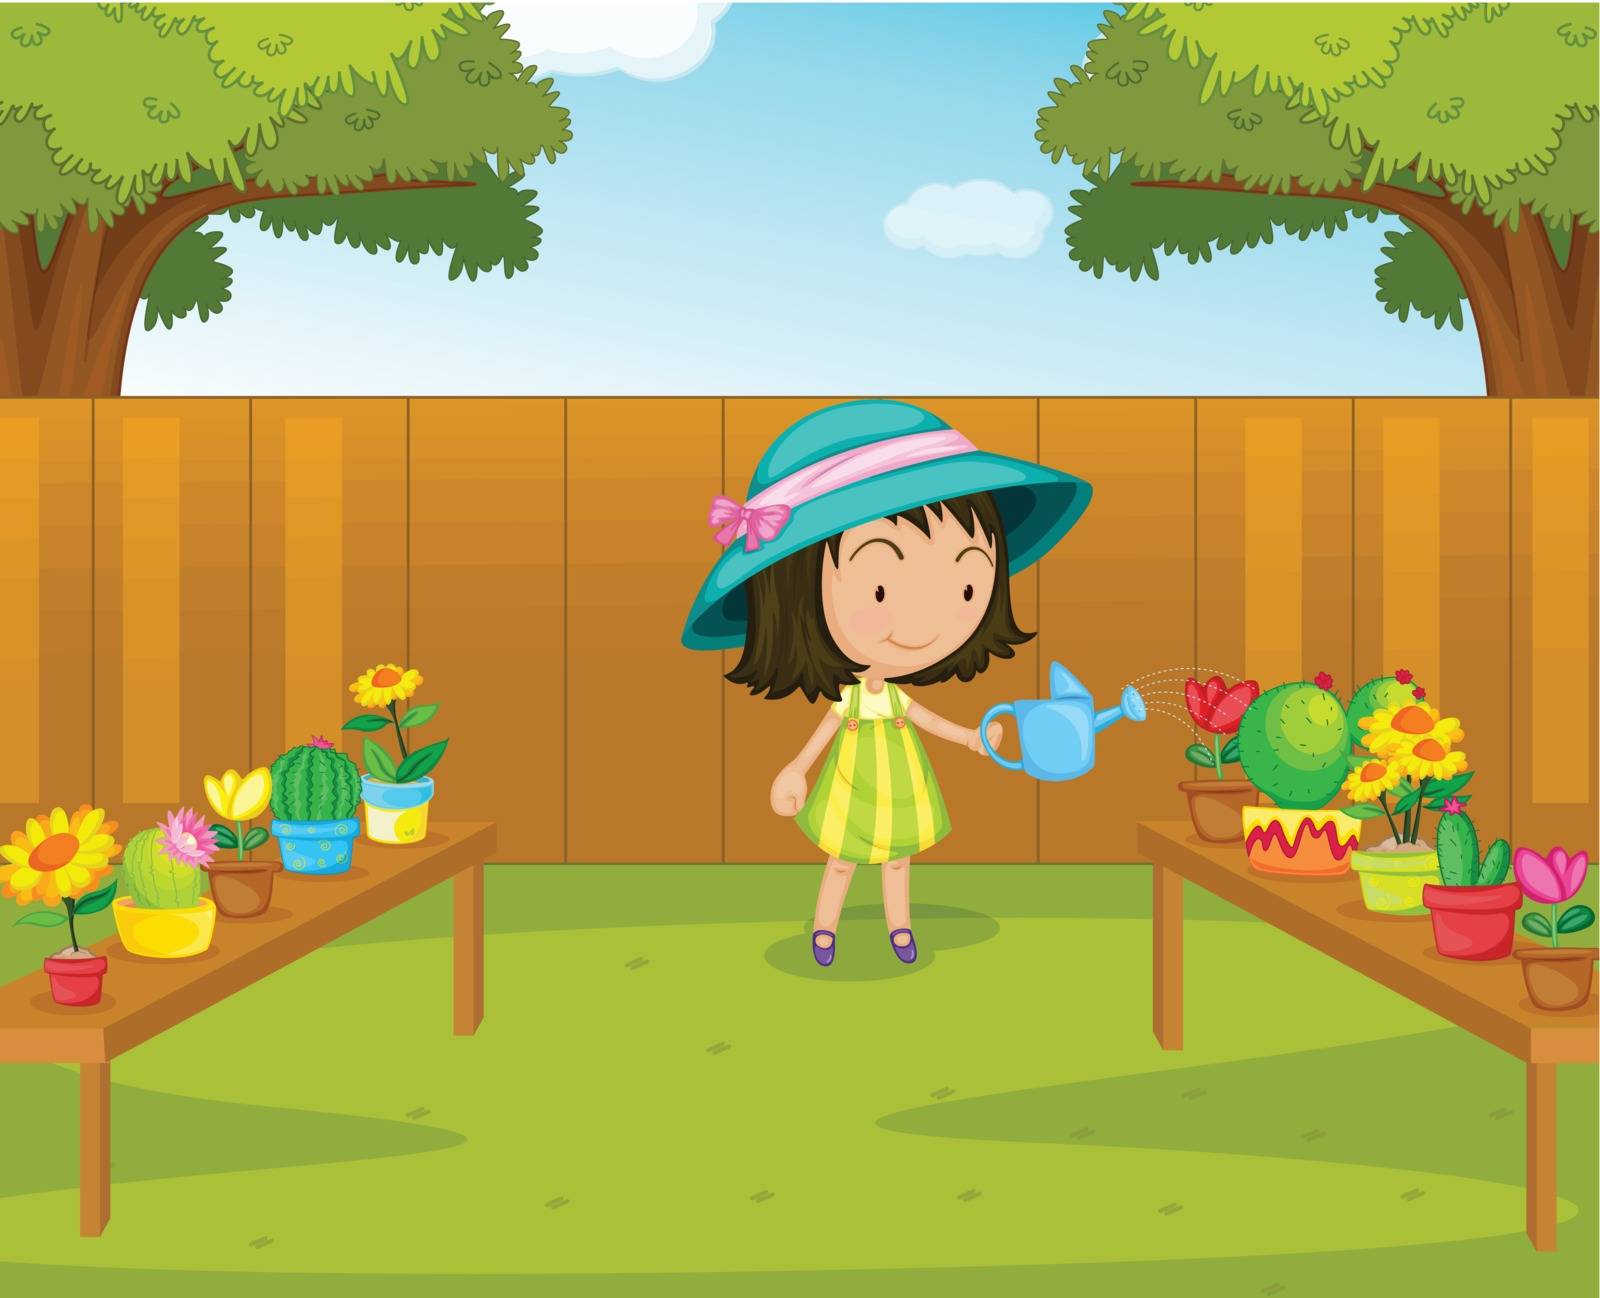 Illustration of a gril watering plants in the garden